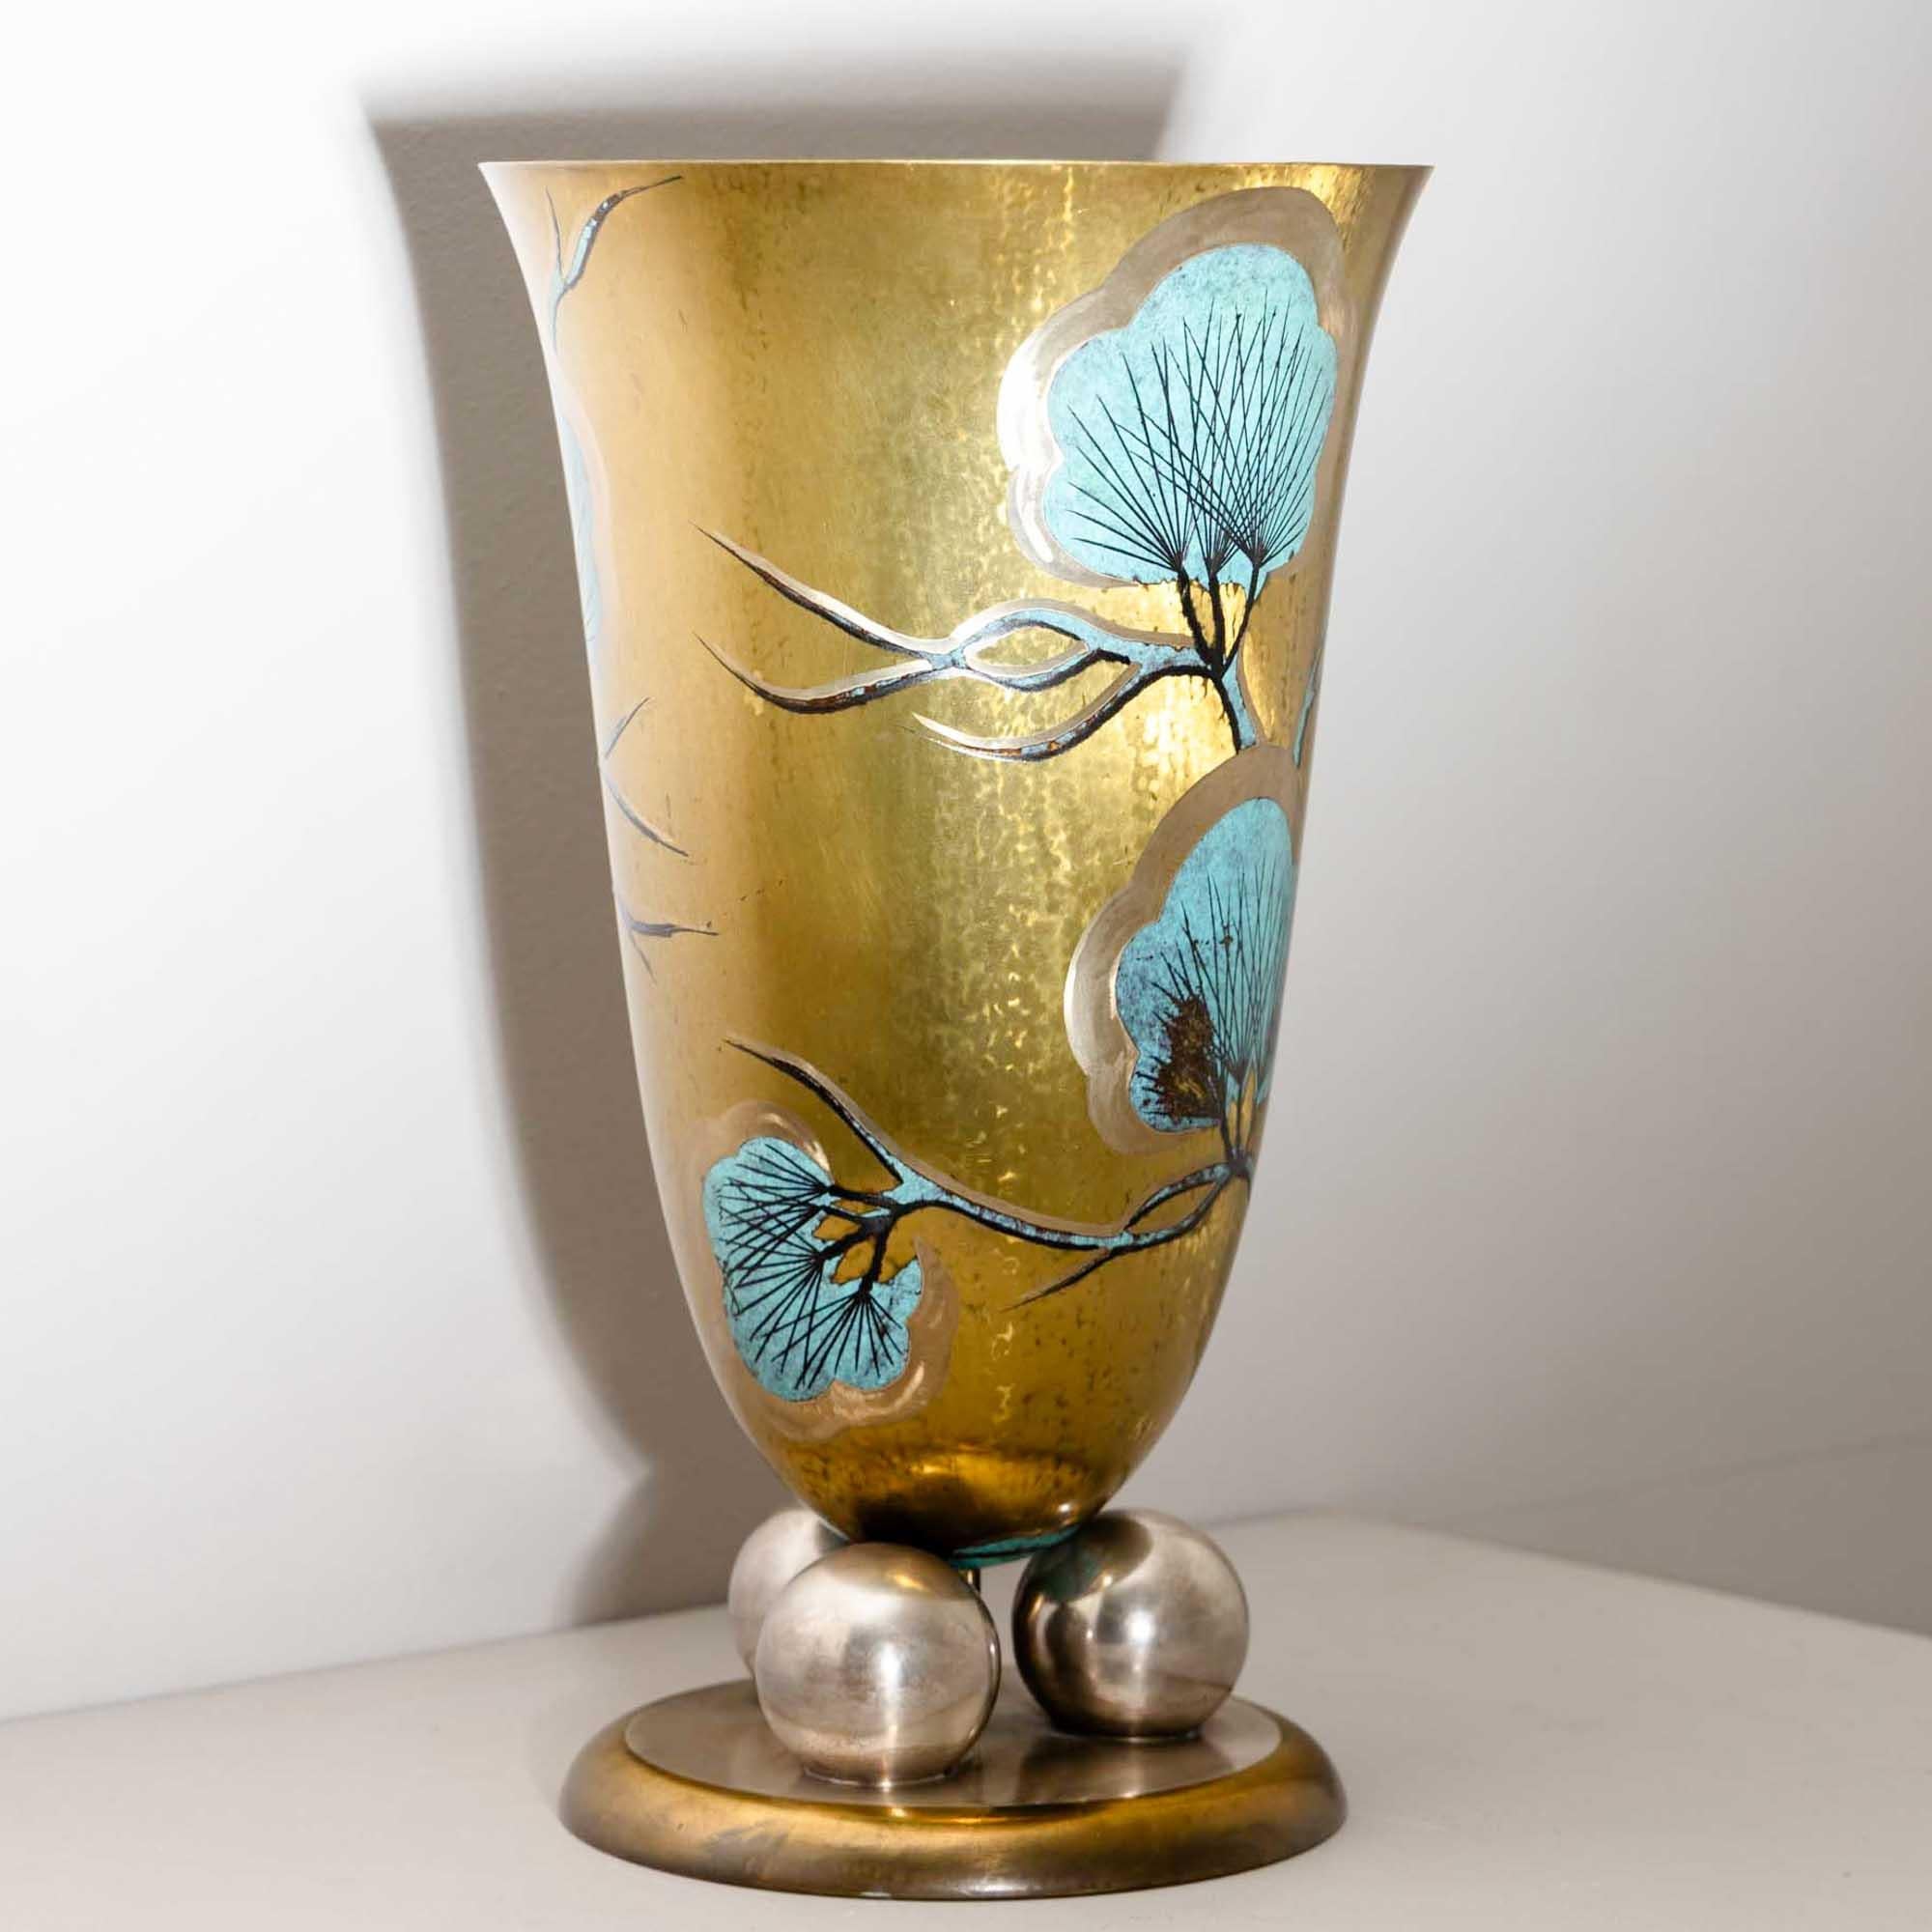 Large WMF Vase with Pine Branch Décor, 1920s/30s In Good Condition For Sale In New York, NY